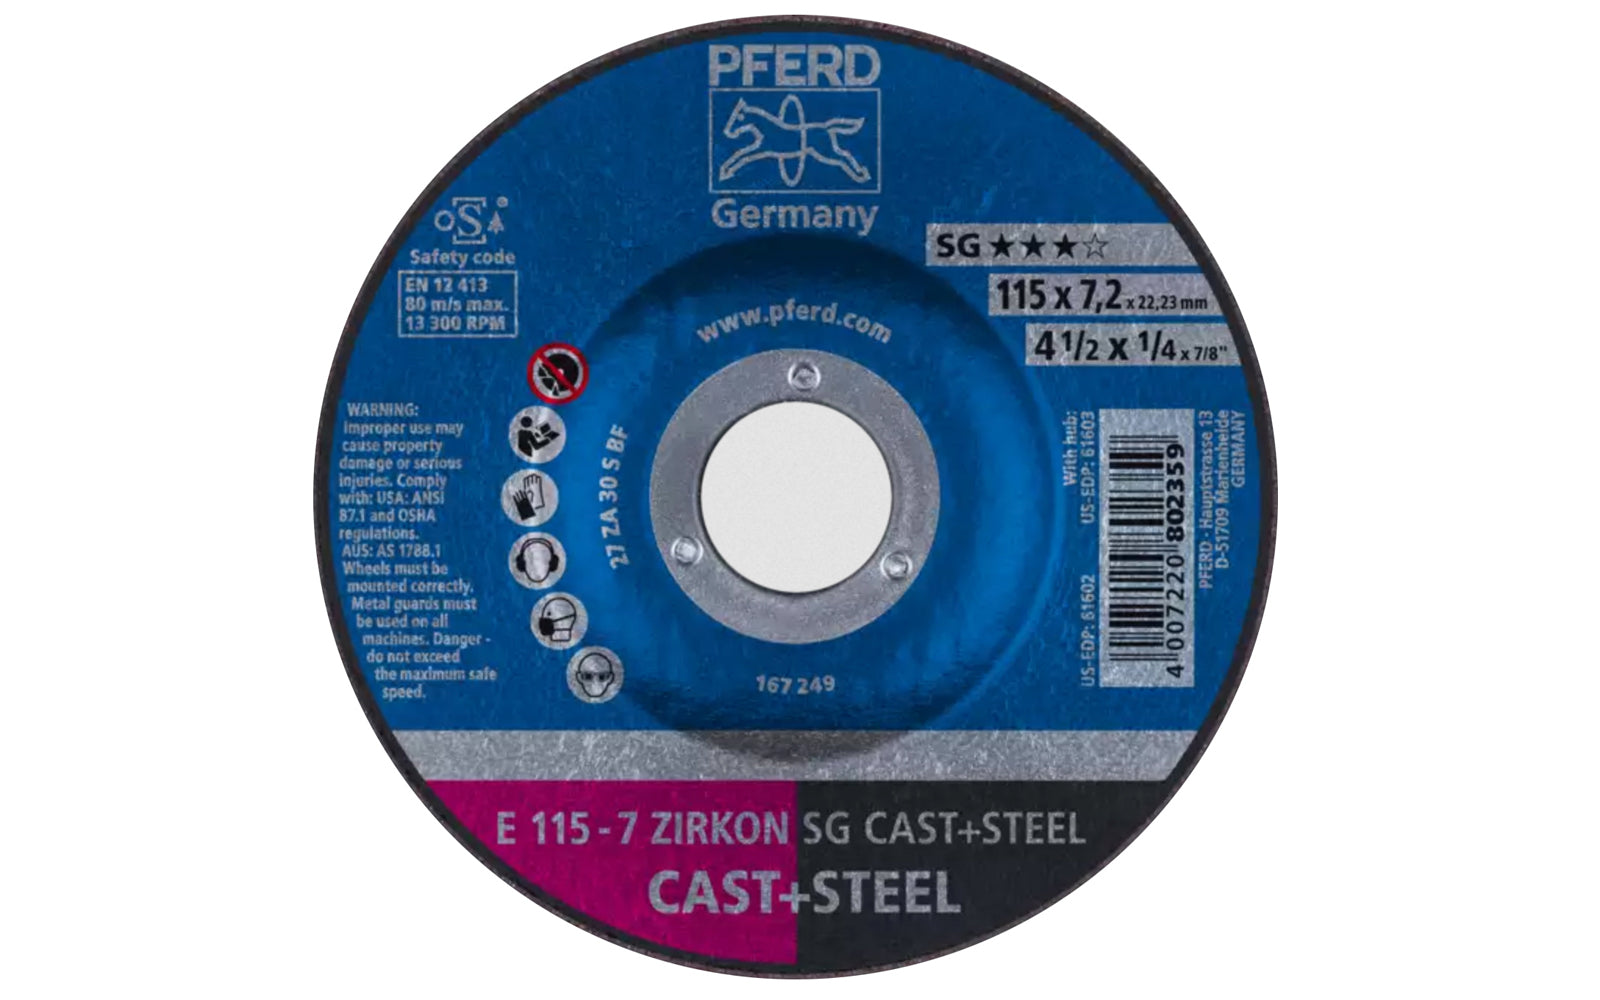 High quality 4-1/2" Zirconium Grinding Wheel made by Pferd in Germany. Model 61602. Zirconia alumina (Zirconium) grinding wheel is designed for steels & cast iron with excellent material removal rate. Fast cutting. 4-1/2" diameter. 7/8" arbor hole. 1/4" thickness of blade. 4007220802359. Made in Germany.